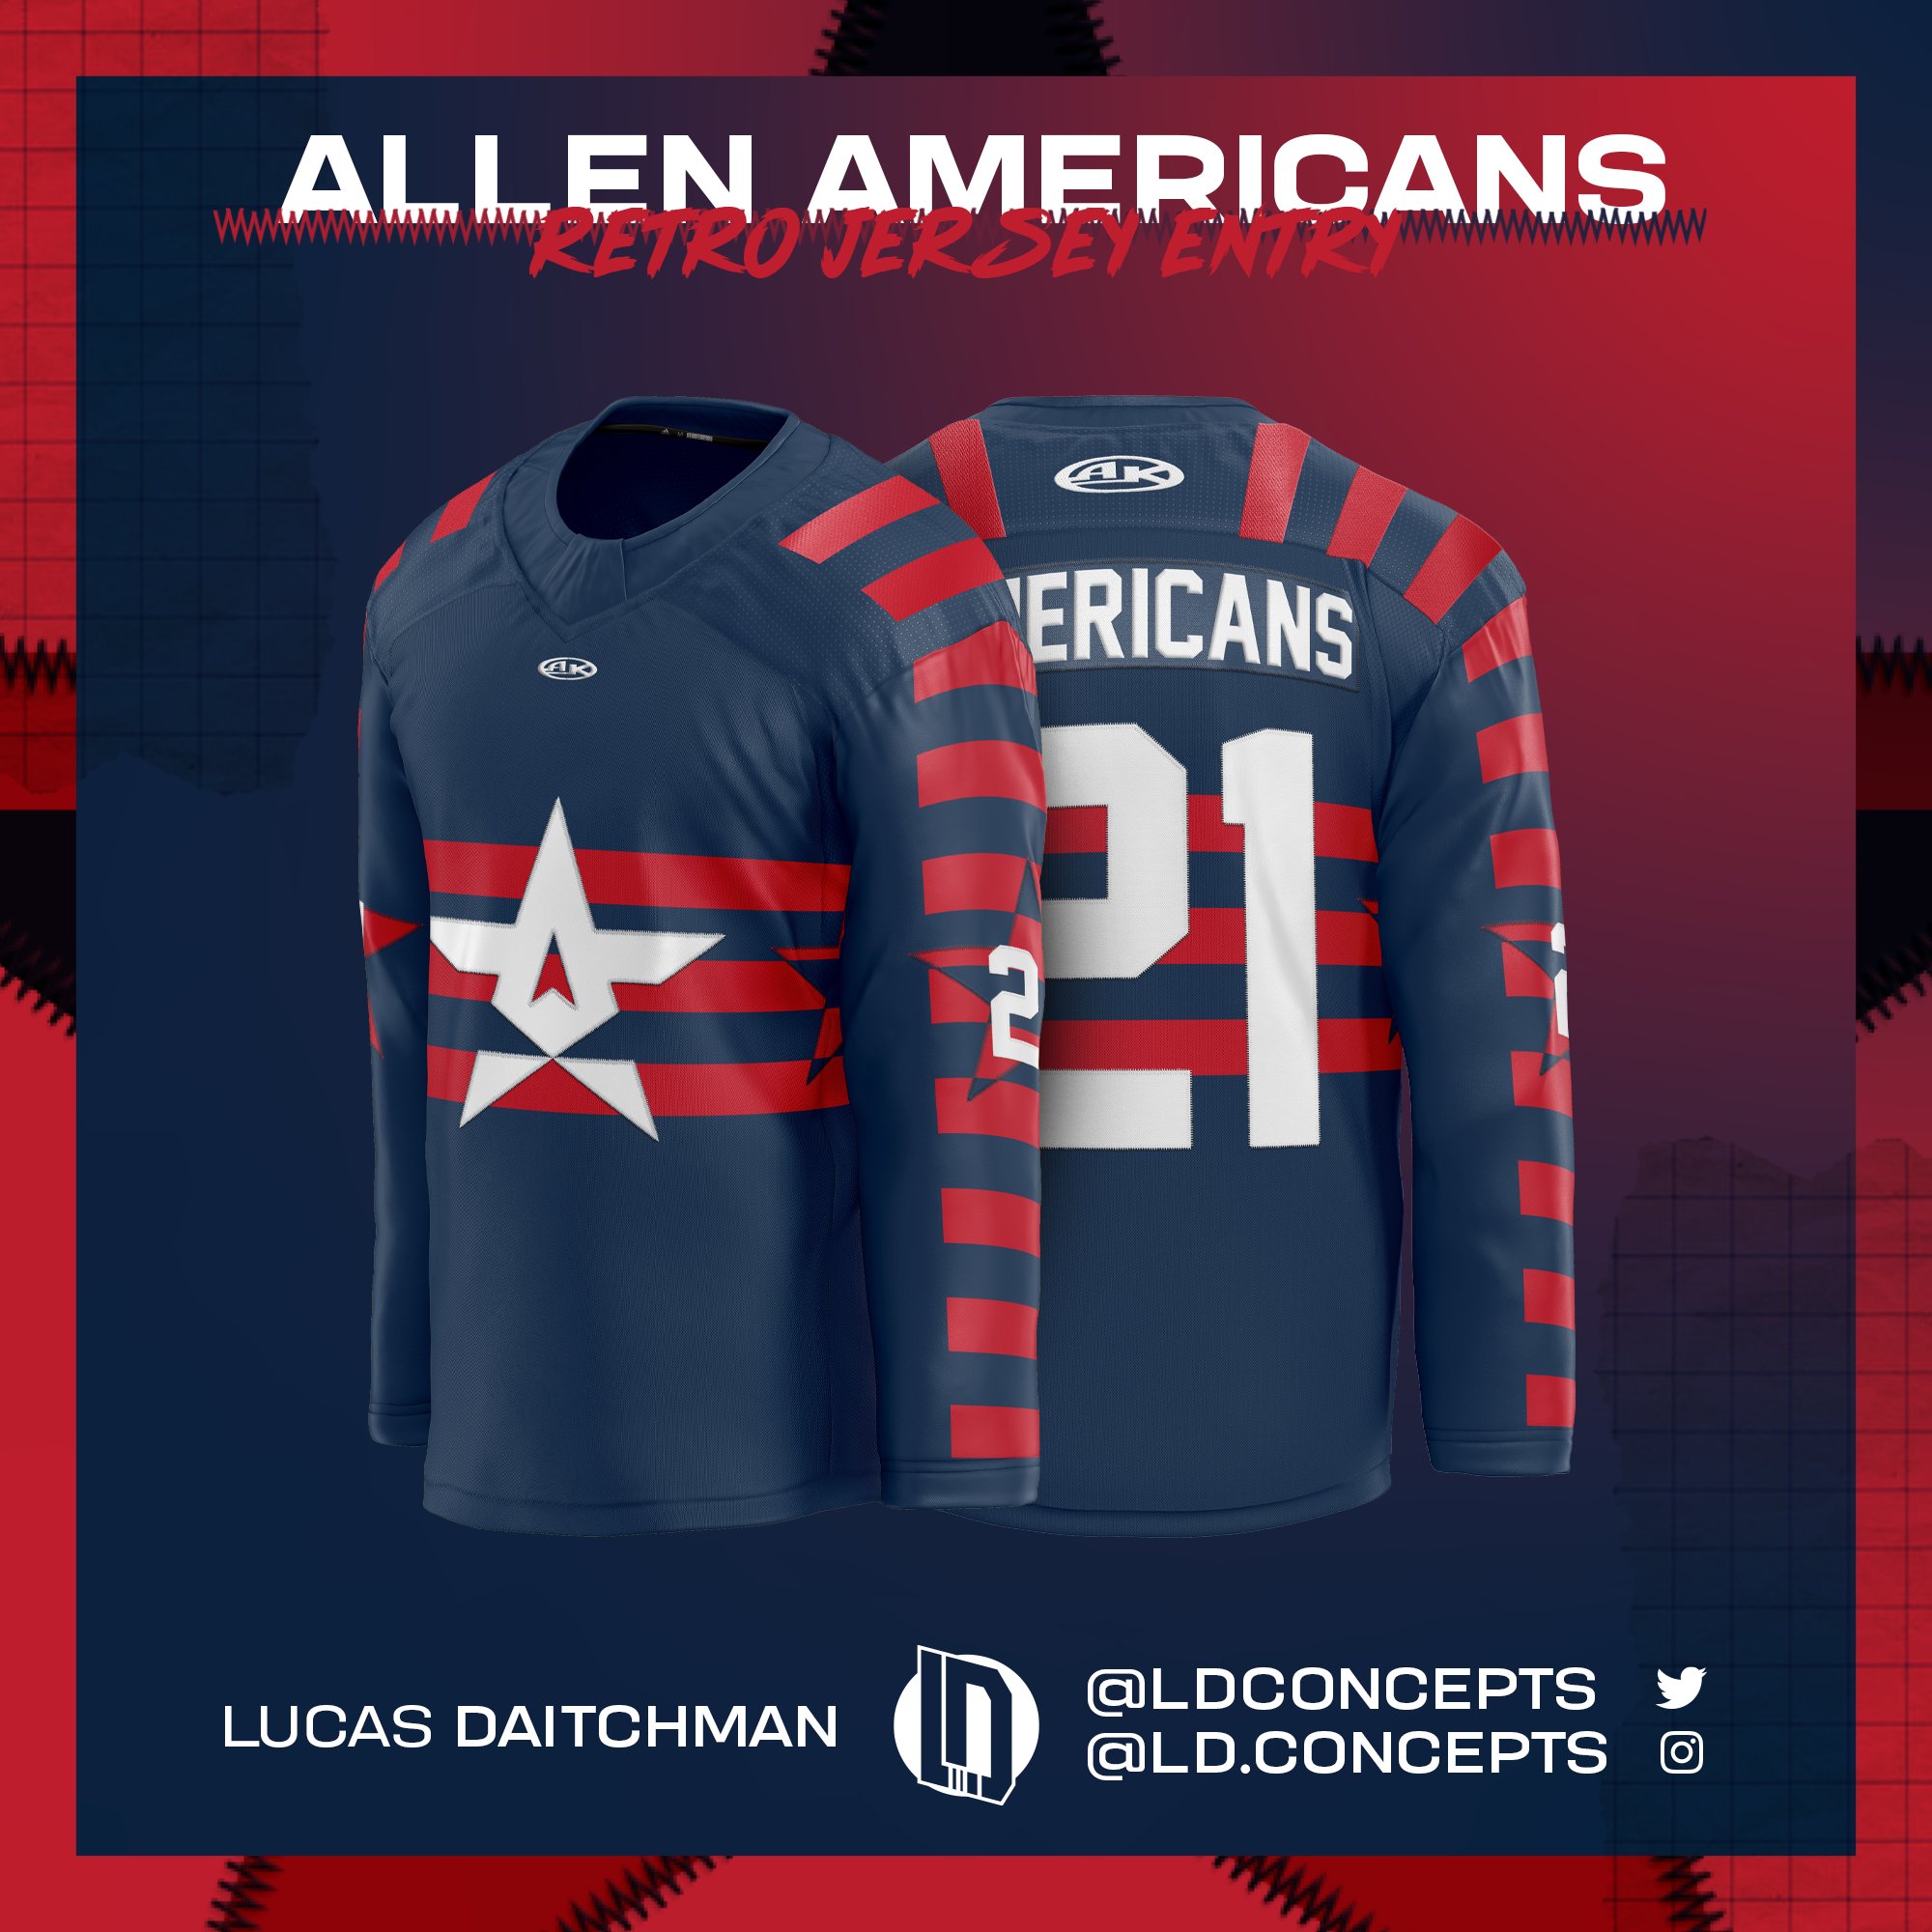 Lucas Daitchman on X: Here's a pair of jersey ideas for the 2023  #NHLAllStar tournament in South Florida. The wacky stripes play off the  event logo unveiled last month and keep things